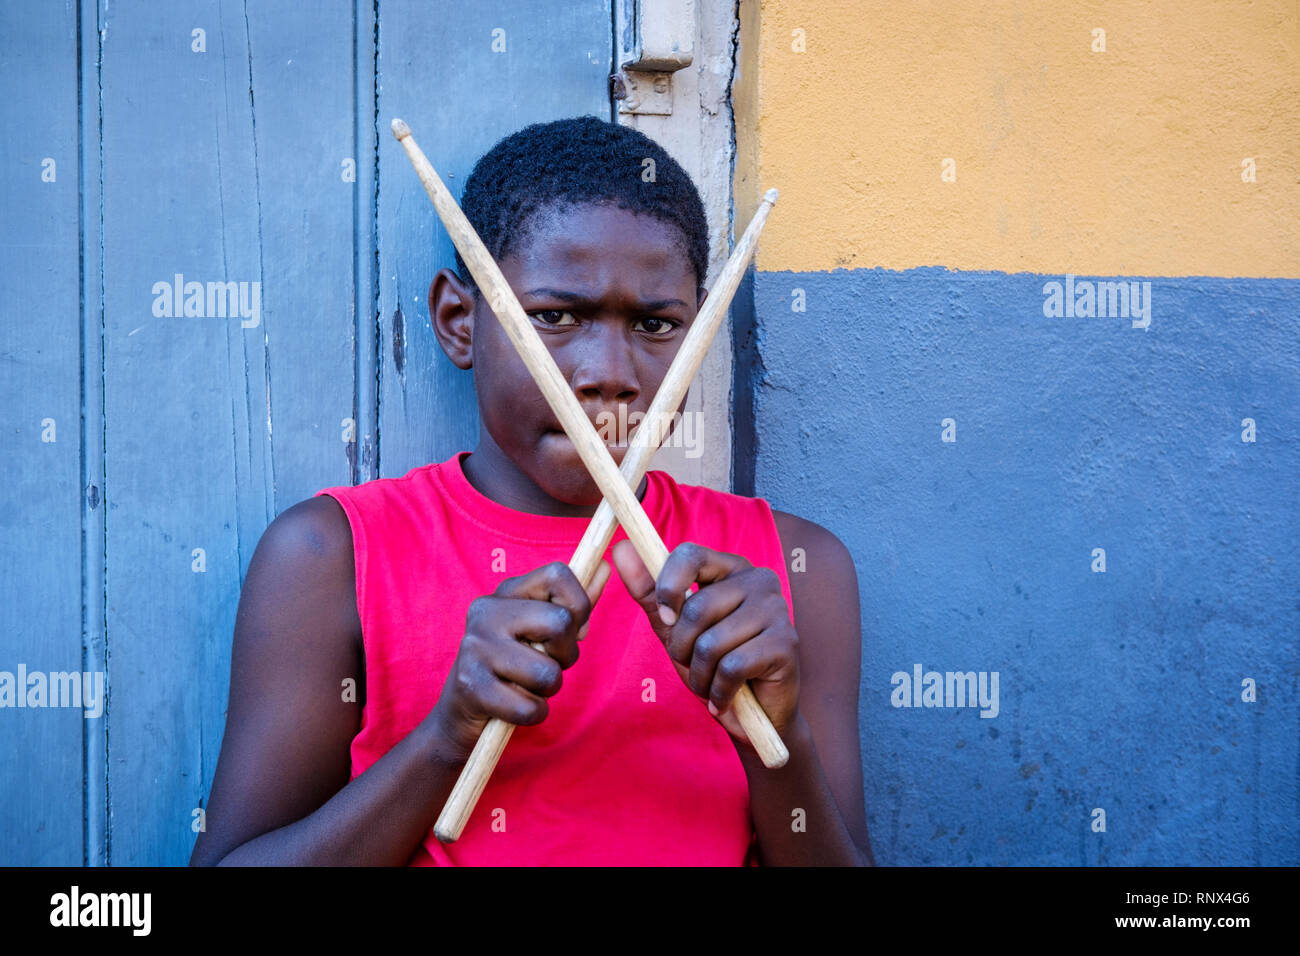 Portrait of young African-American street drummer boy looking at camera holding drumsticks on Bourbon Street, New Orleans French Quarter New Orleans Stock Photo